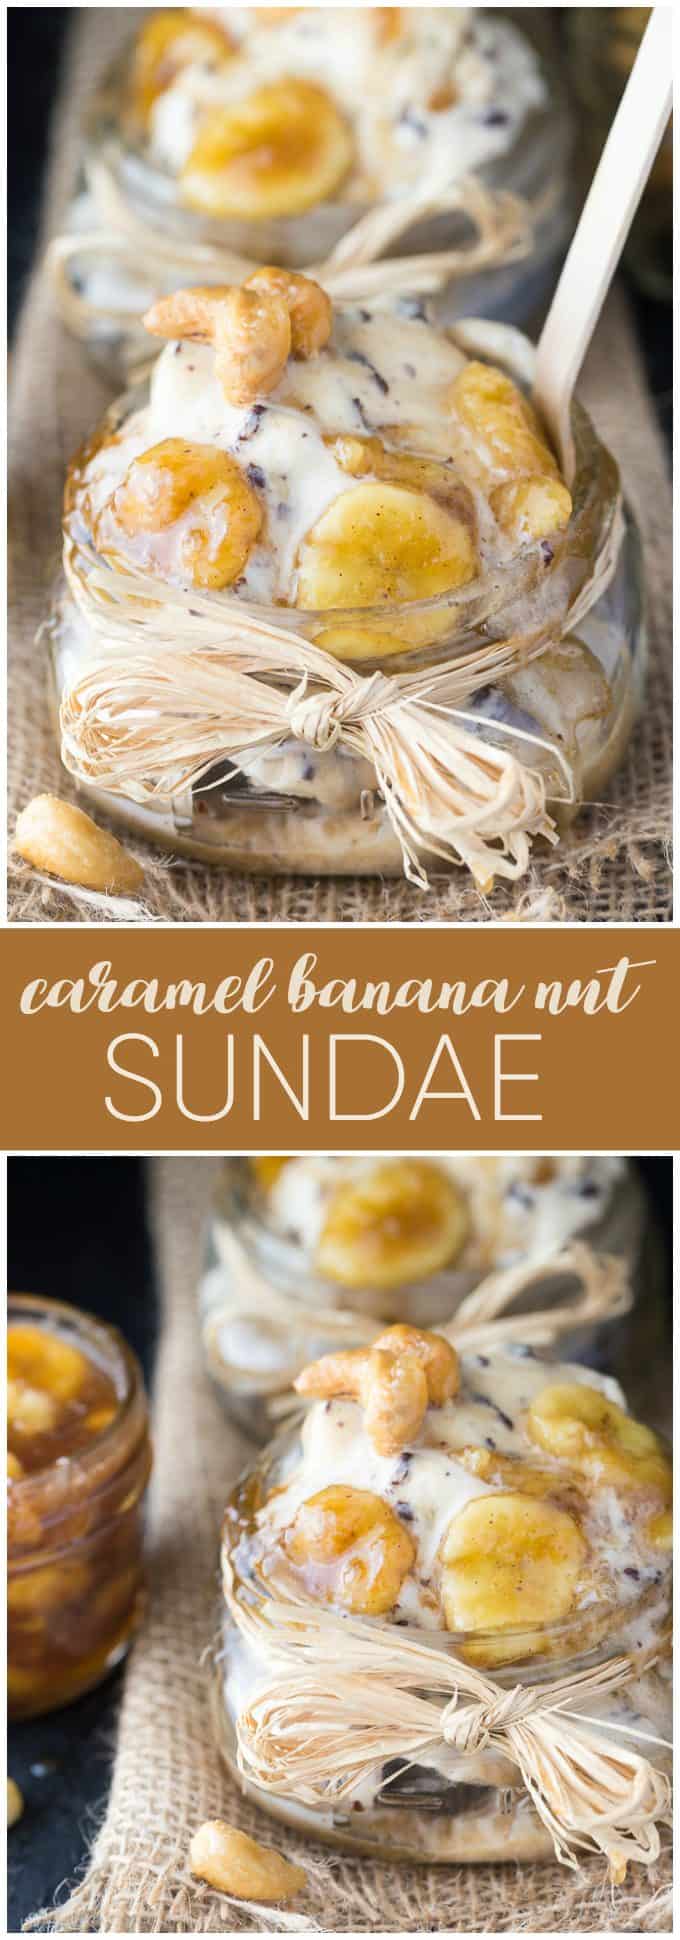 Caramel Banana Nut Sundae - Indulge in one of the most scrumptious sundae recipes ever! Salted Caramel Cluster frozen dessert is covered with a rich, warm banana sauce and topped with candied cashews. 